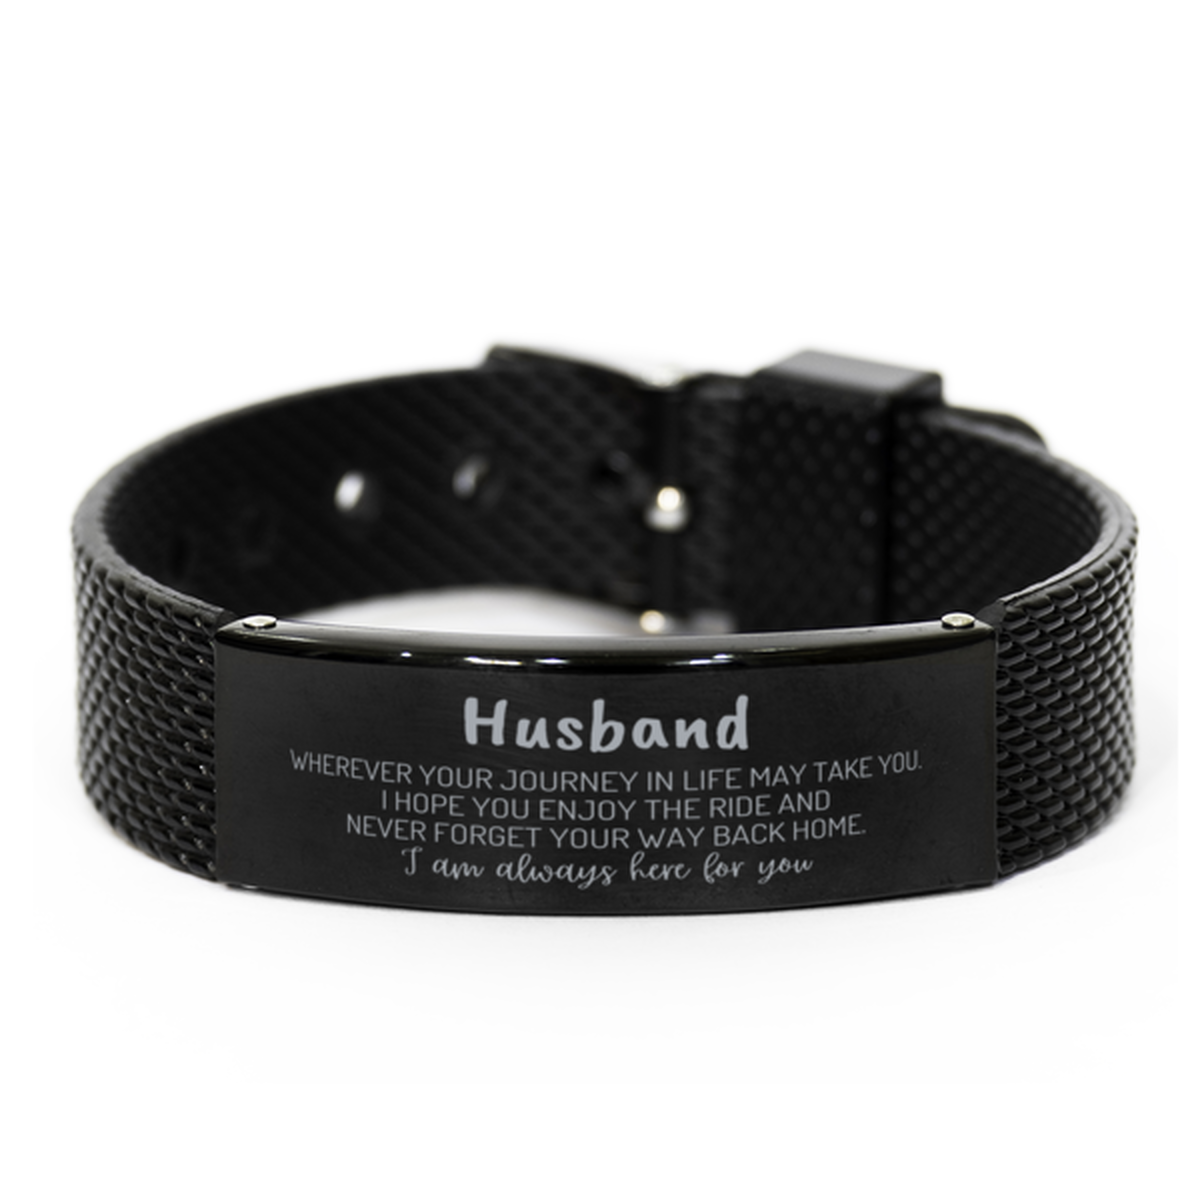 Husband wherever your journey in life may take you, I am always here for you Husband Black Shark Mesh Bracelet, Awesome Christmas Gifts For Husband, Husband Birthday Gifts for Men Women Family Loved One